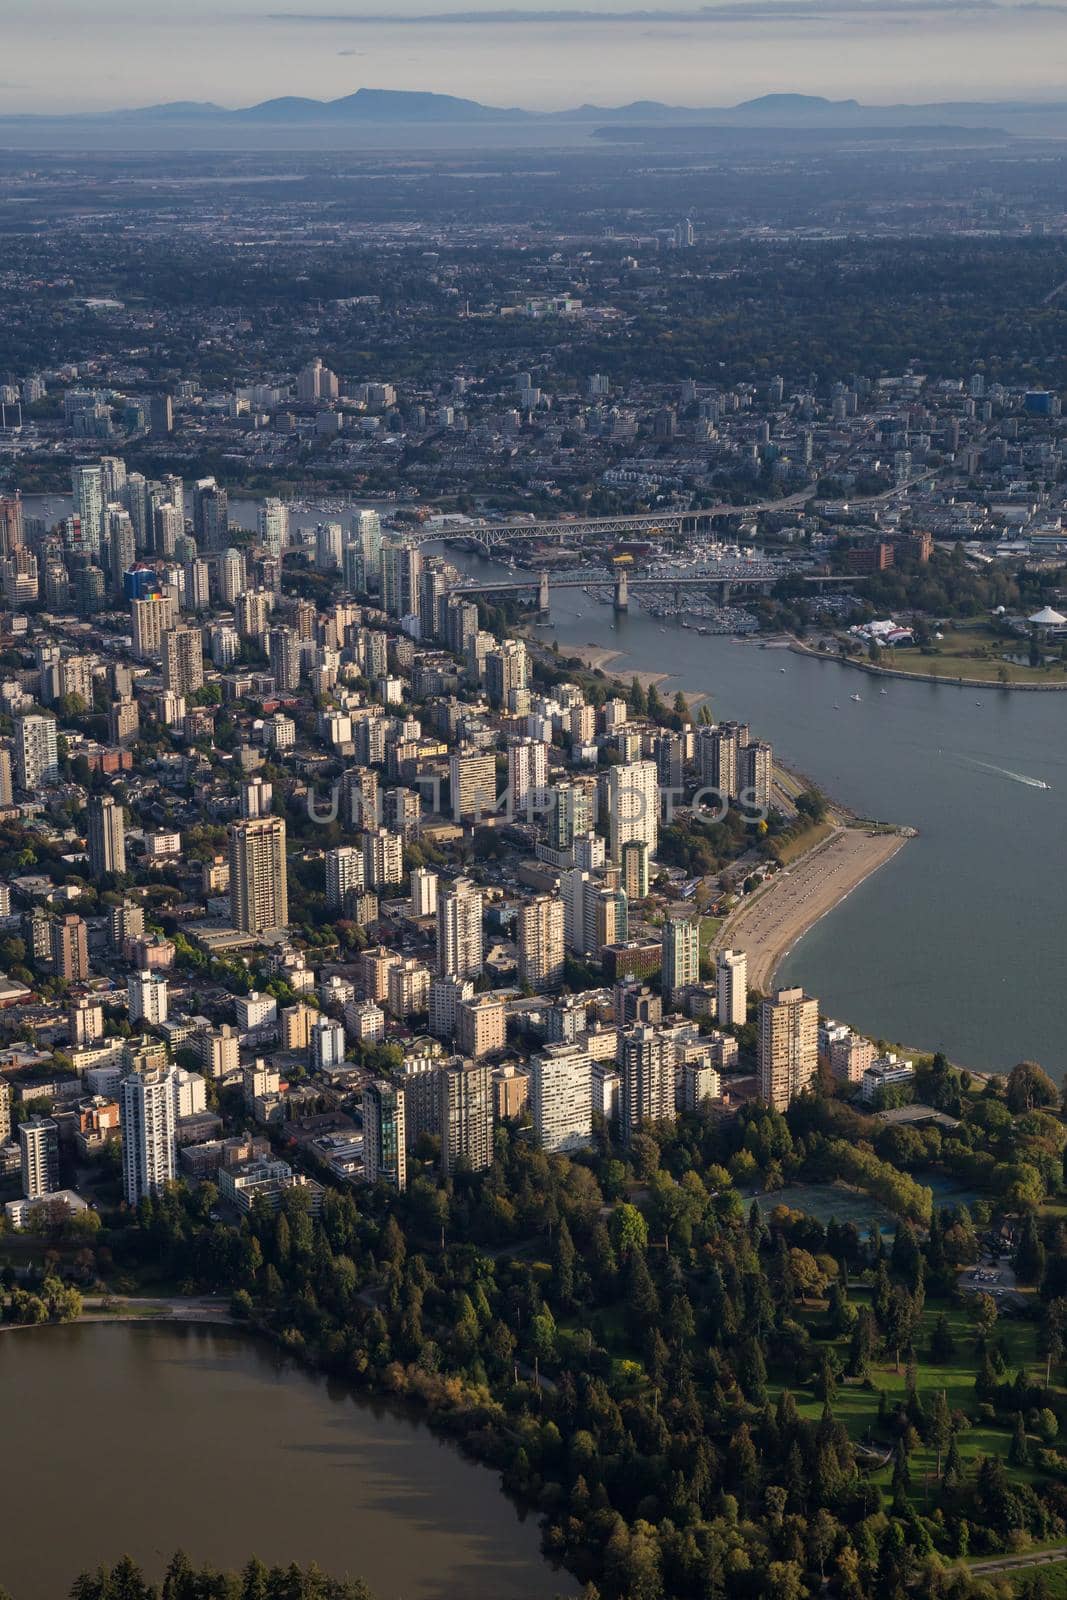 Downtown Vancouver City , Stanley Park and False Creek viewed from an aerial perspective. Picture taken in British Columbia, Canada, during a sunny day.